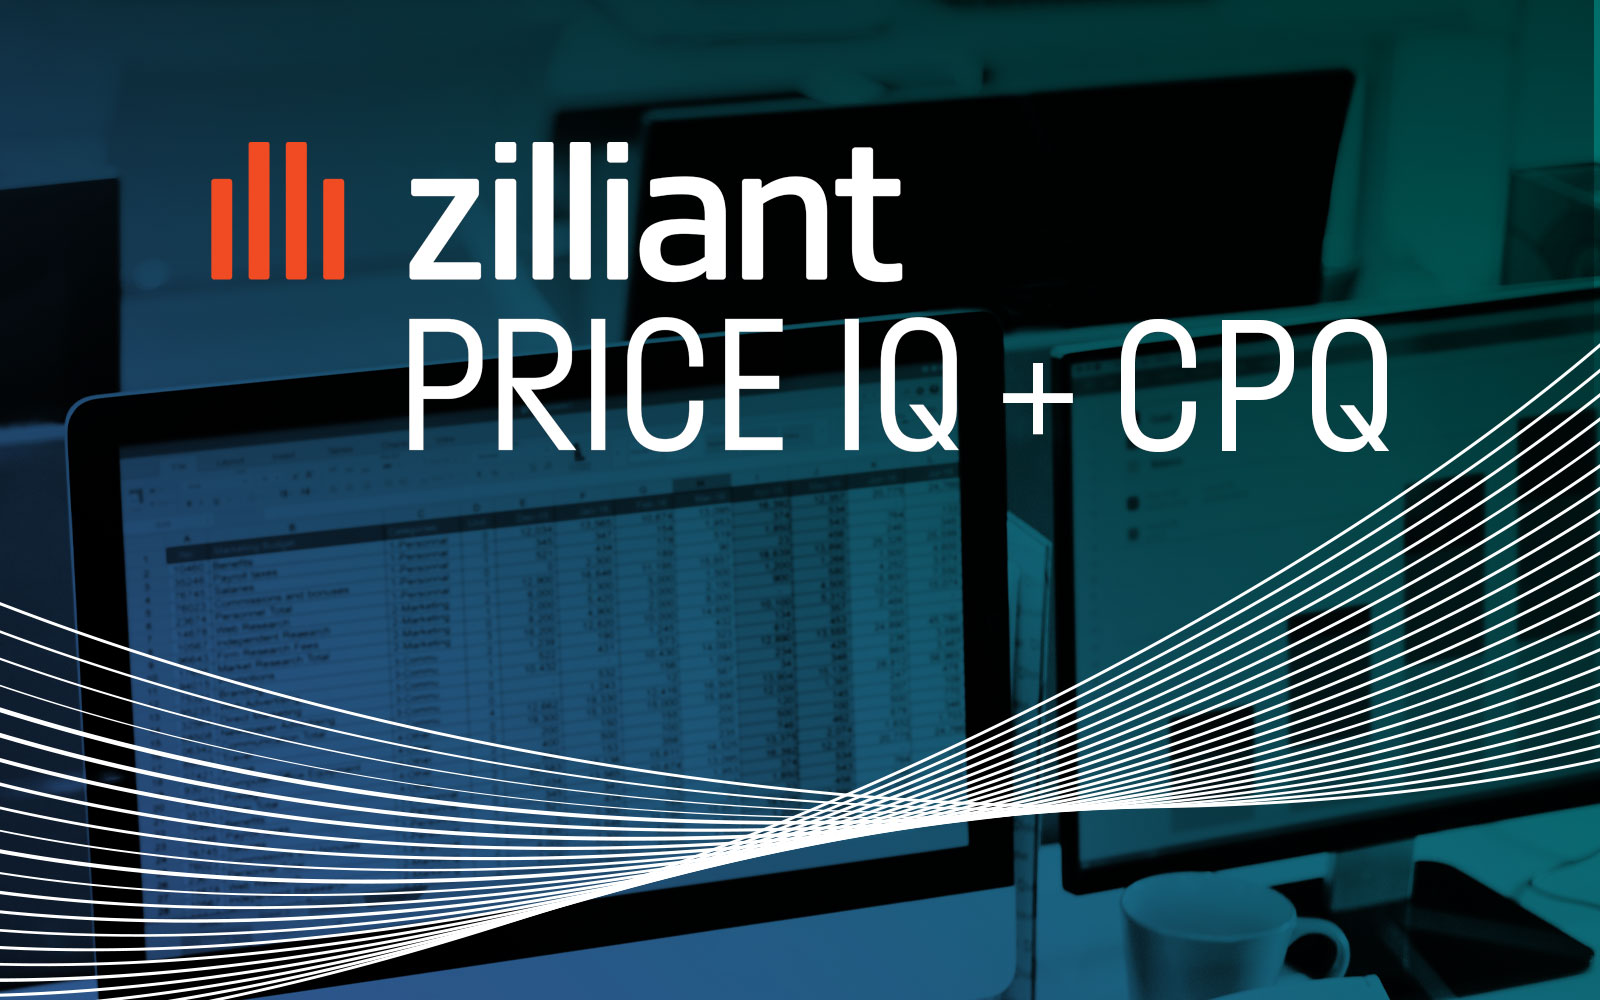 Zilliant Price IQ™ is Integrated with Oracle Cloud and Now Available in the Oracle Cloud Marketplace